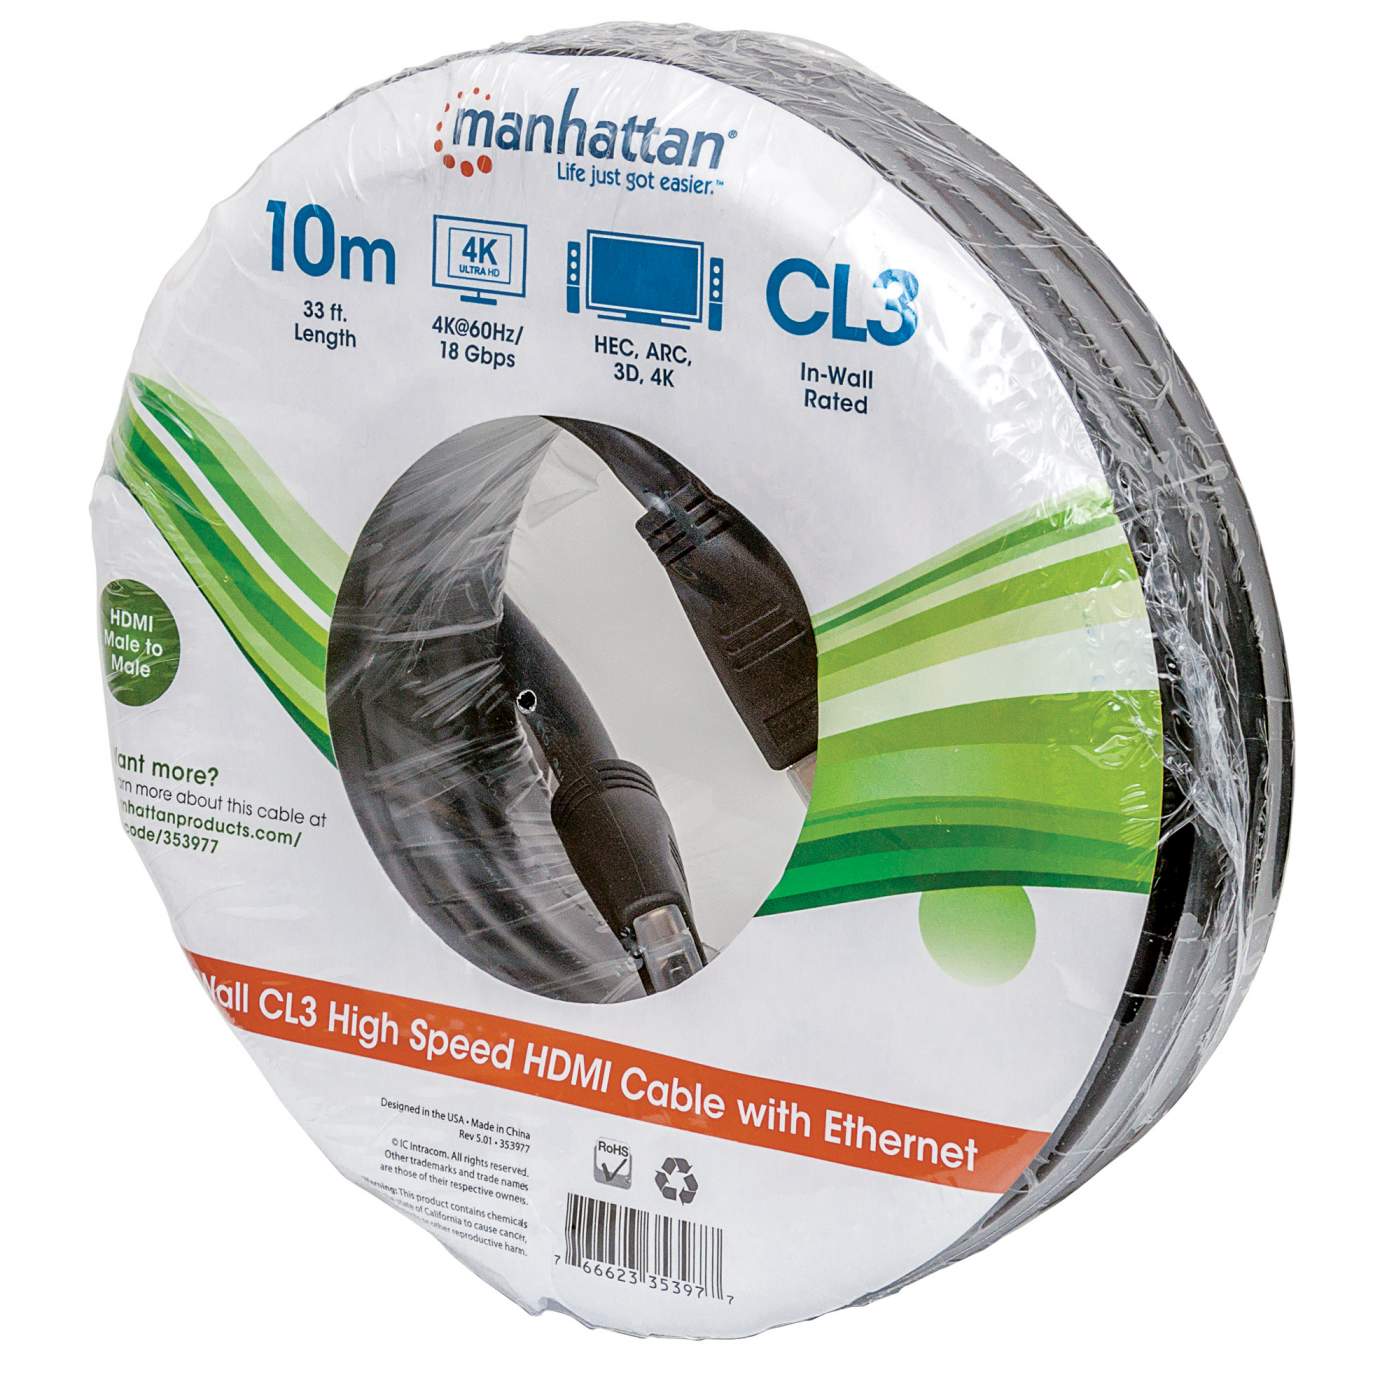 In-wall CL3 High Speed HDMI Cable with Ethernet  Packaging Image 2